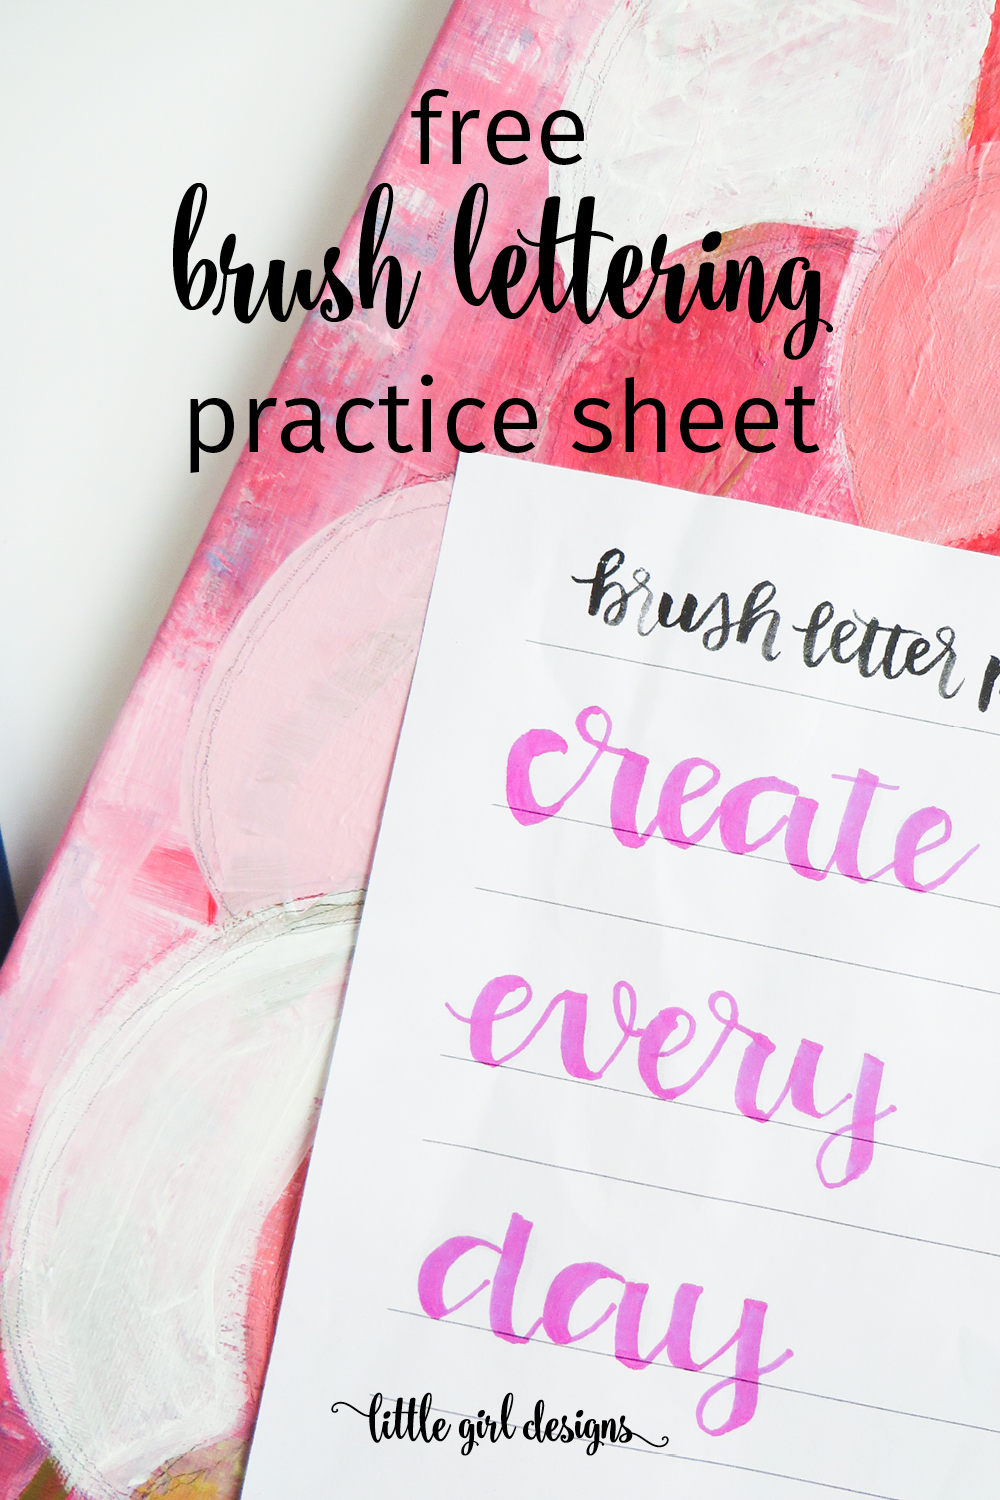 Brush lettering is my new favorite thing. Today you can grab your free practice sheet on my blog. Yippee!